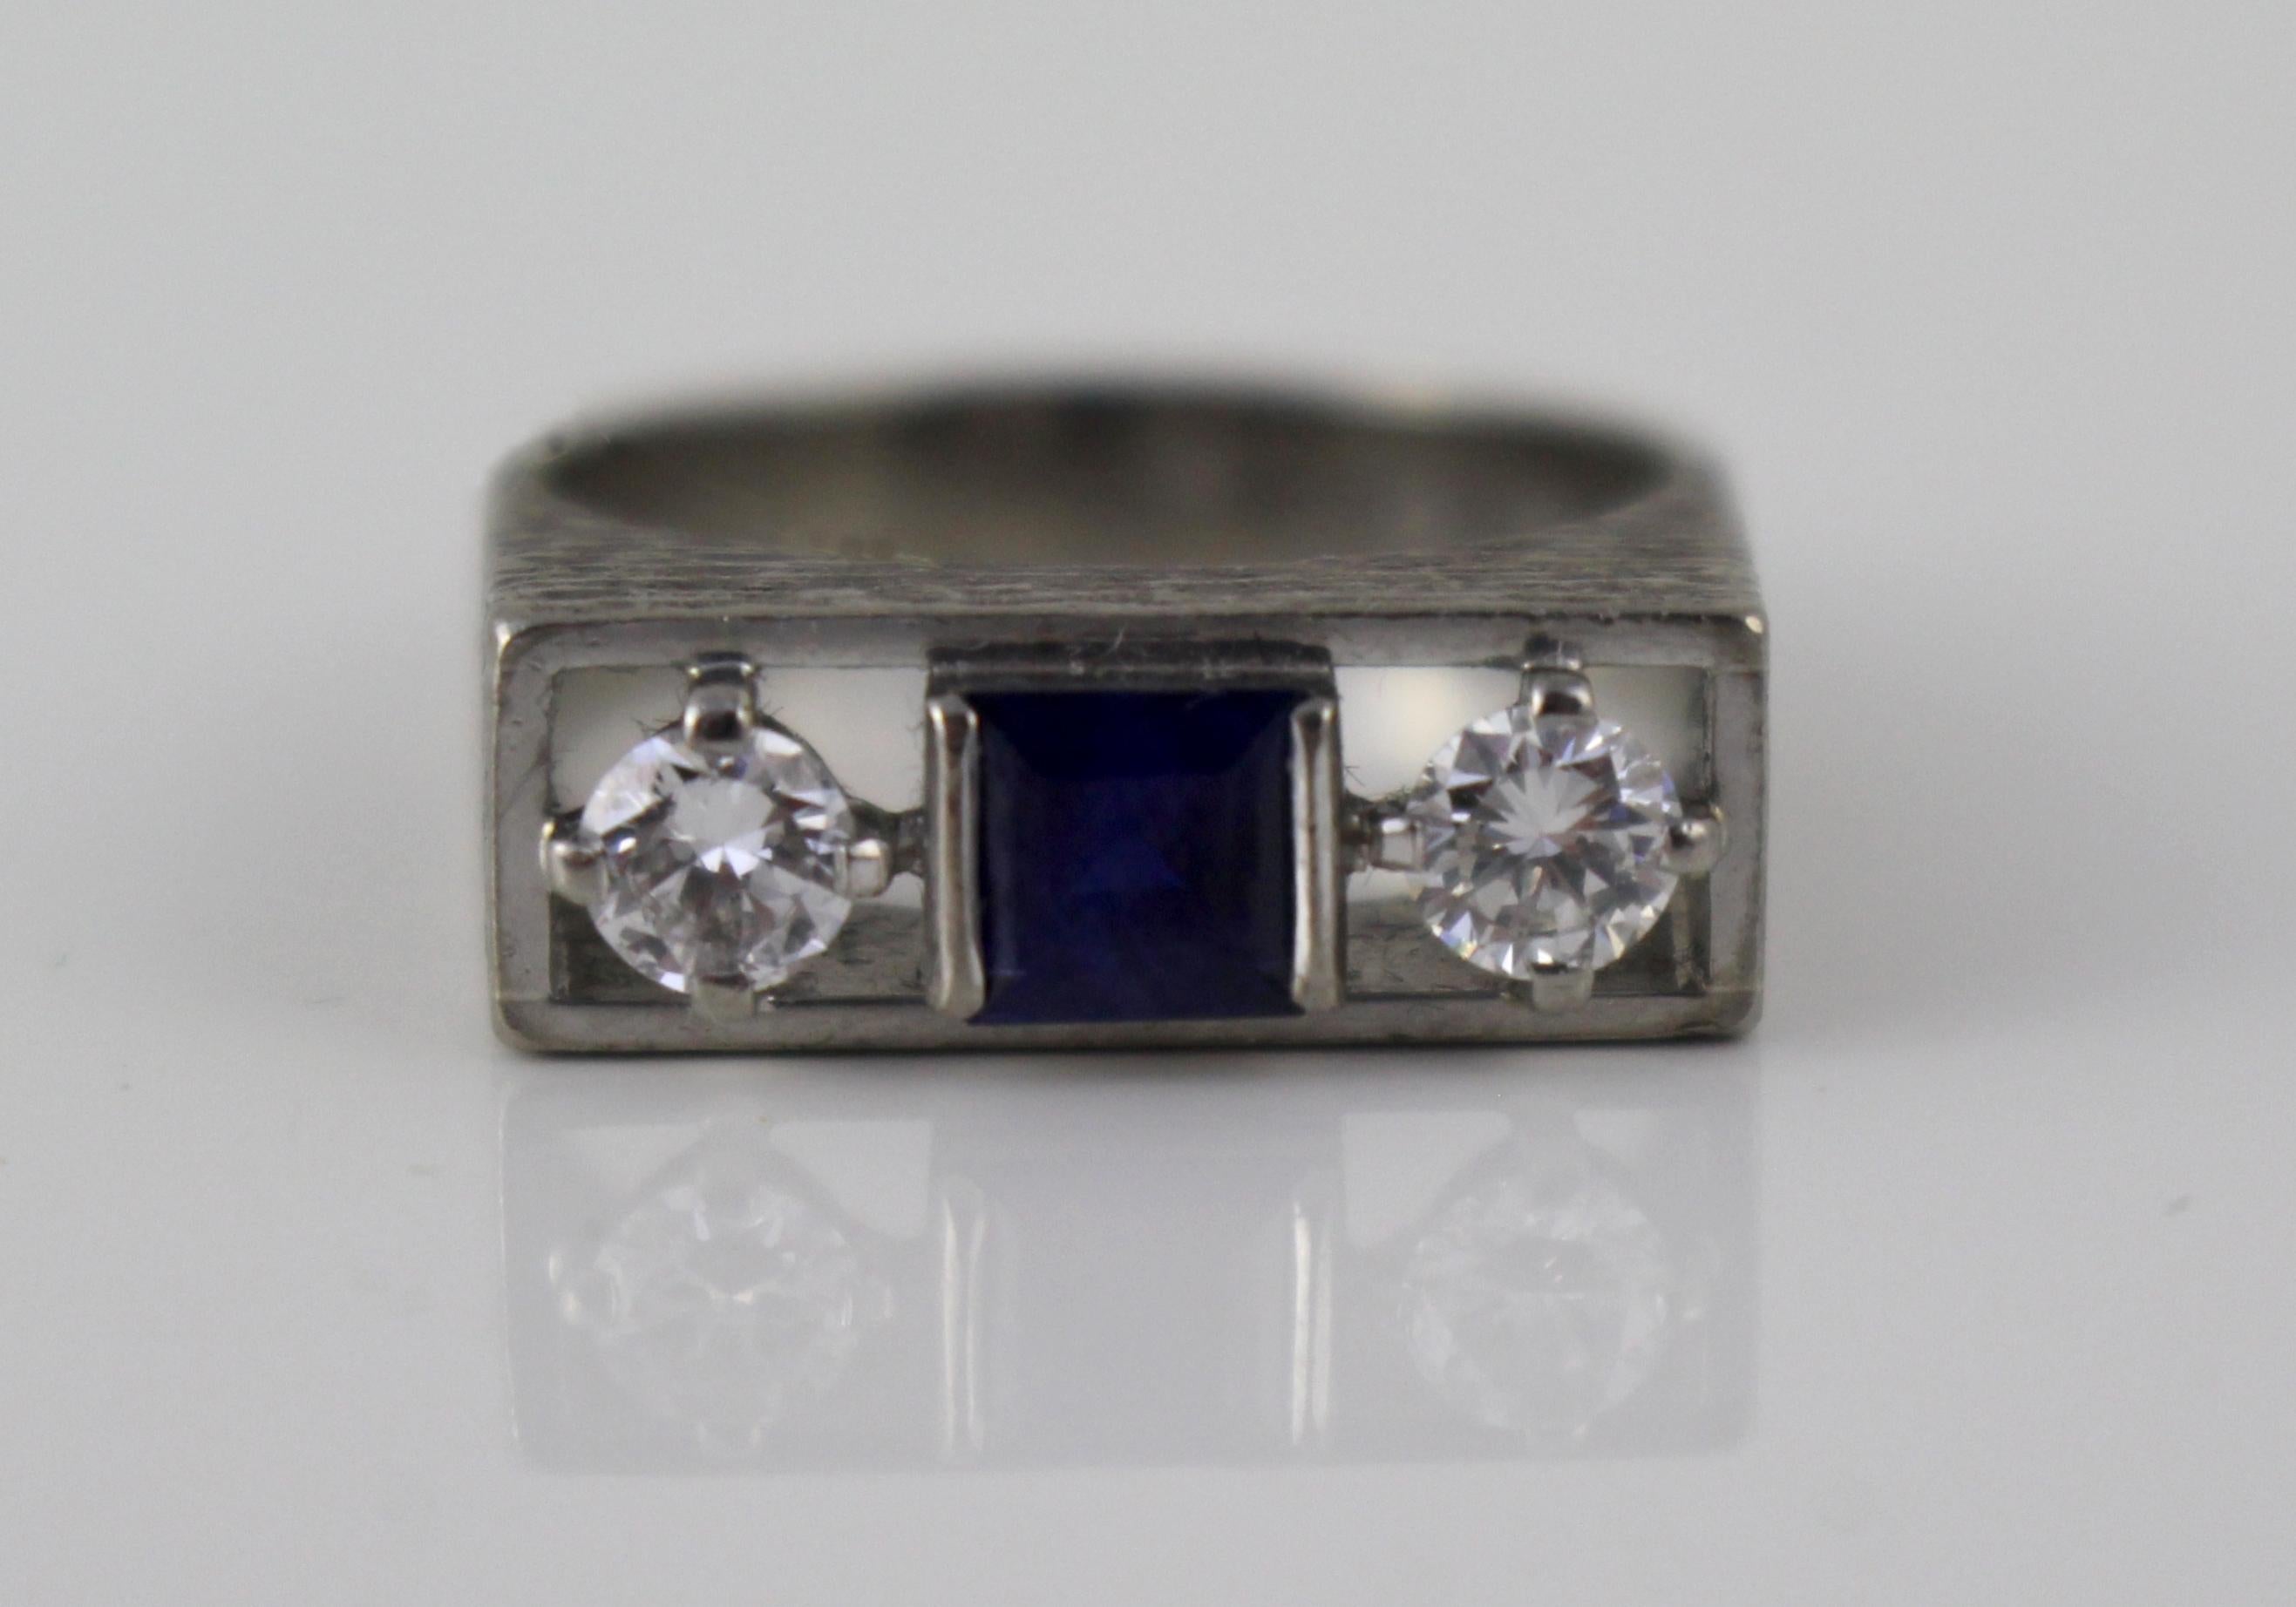 Stone sapphire and diamonds
Sapphire Square step cut blue sapphire, measuring 4.67 x 4.6 x 3.25 mm. Estimated weigth 0.70 metric carat, medium blue in colour, included with some colour zoning
Diamonds Pair of four claw set diamonds; one modern